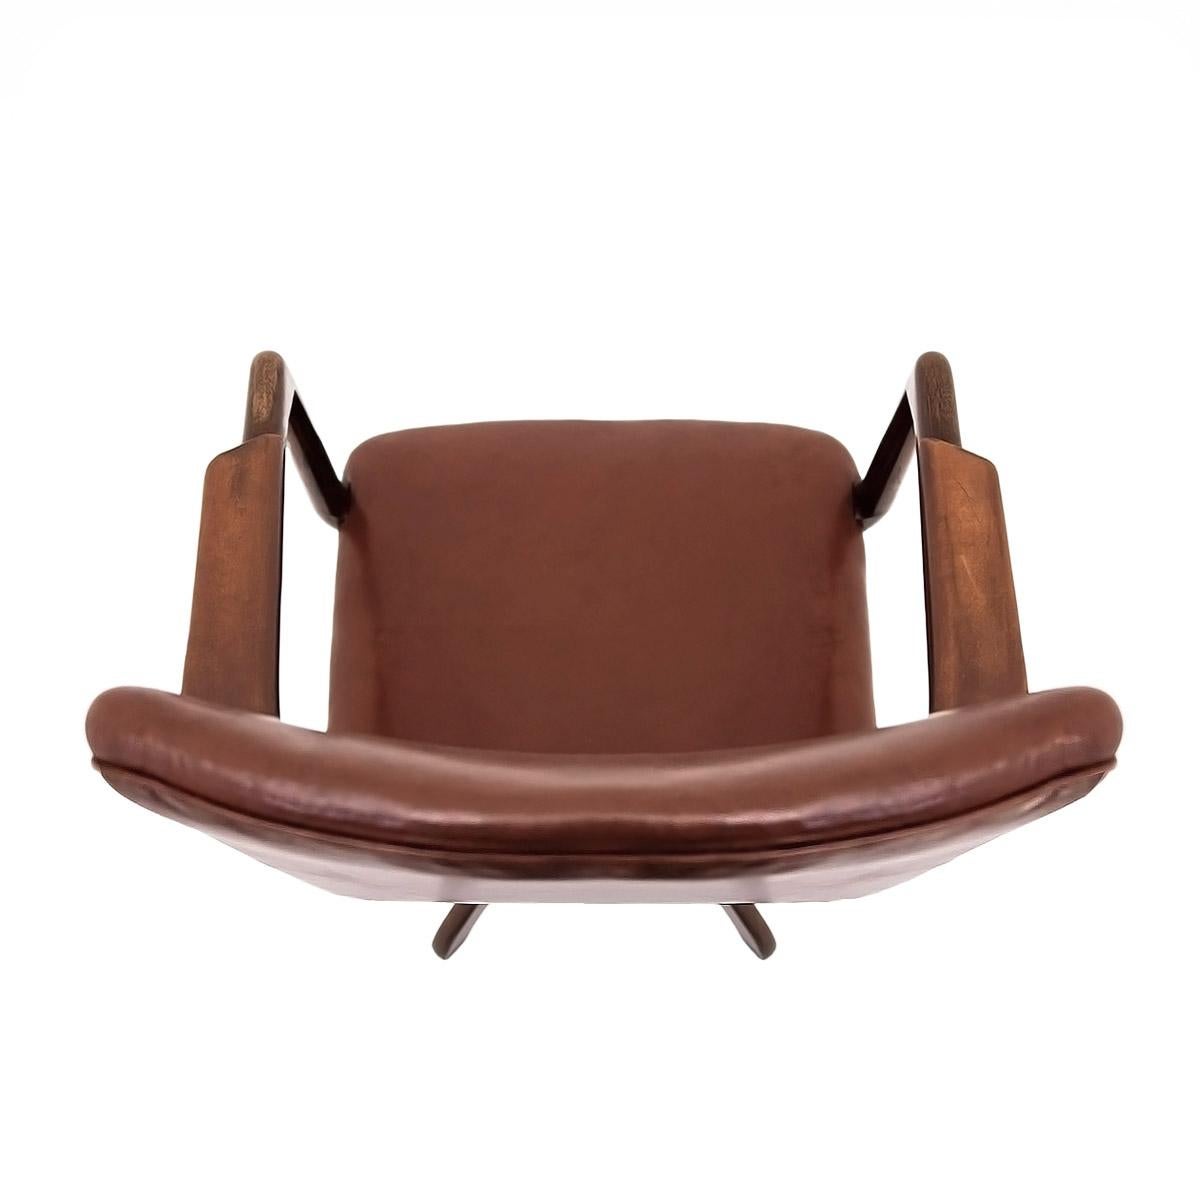 Steel Hans J. Wegner Danish 1940s Leather and Oak Model A721 Executive Chair For Sale